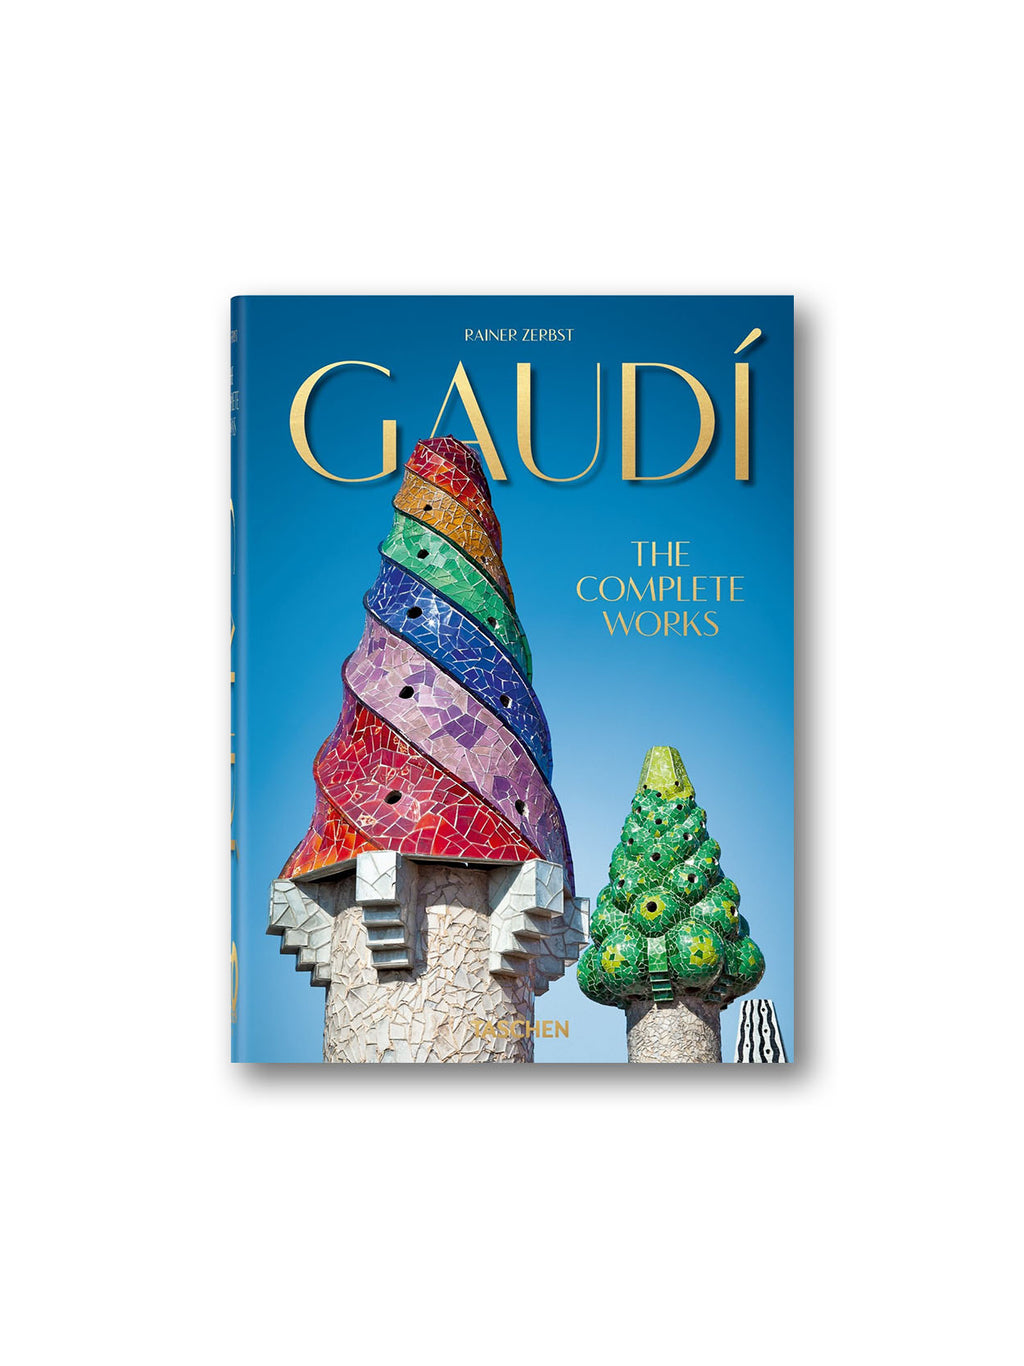 Gaudi - The Complete Works - 40th Anniversary Edition